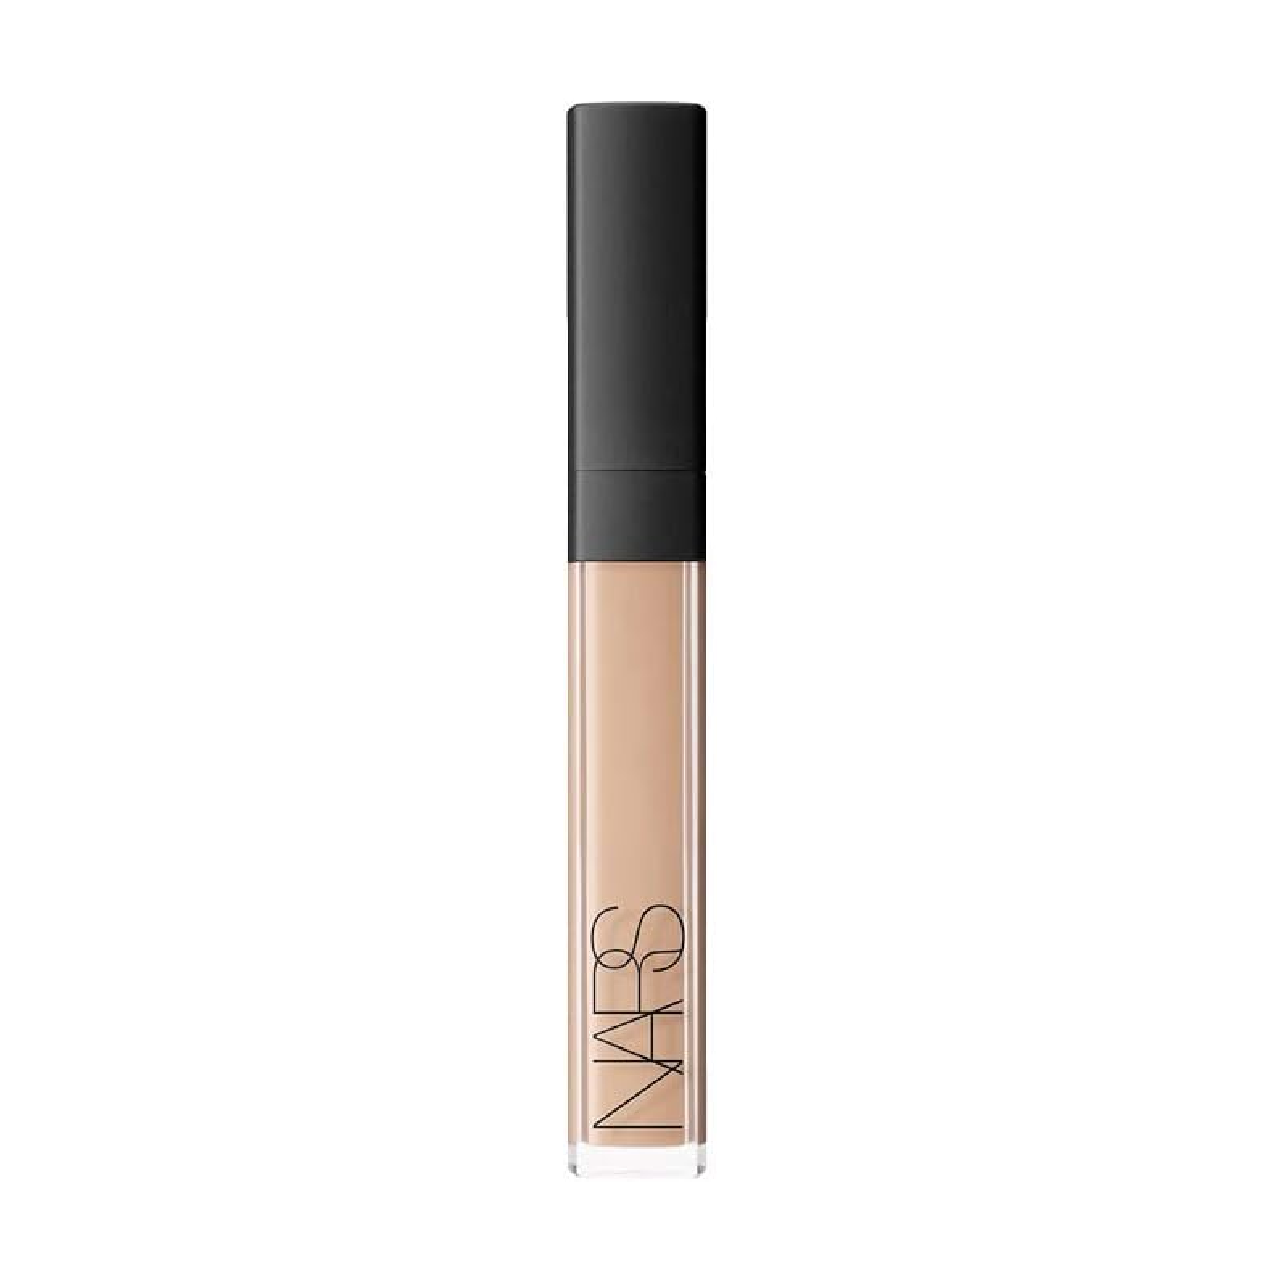 NARS Radiant Creamy Concealer tube displayed against a pure white background.